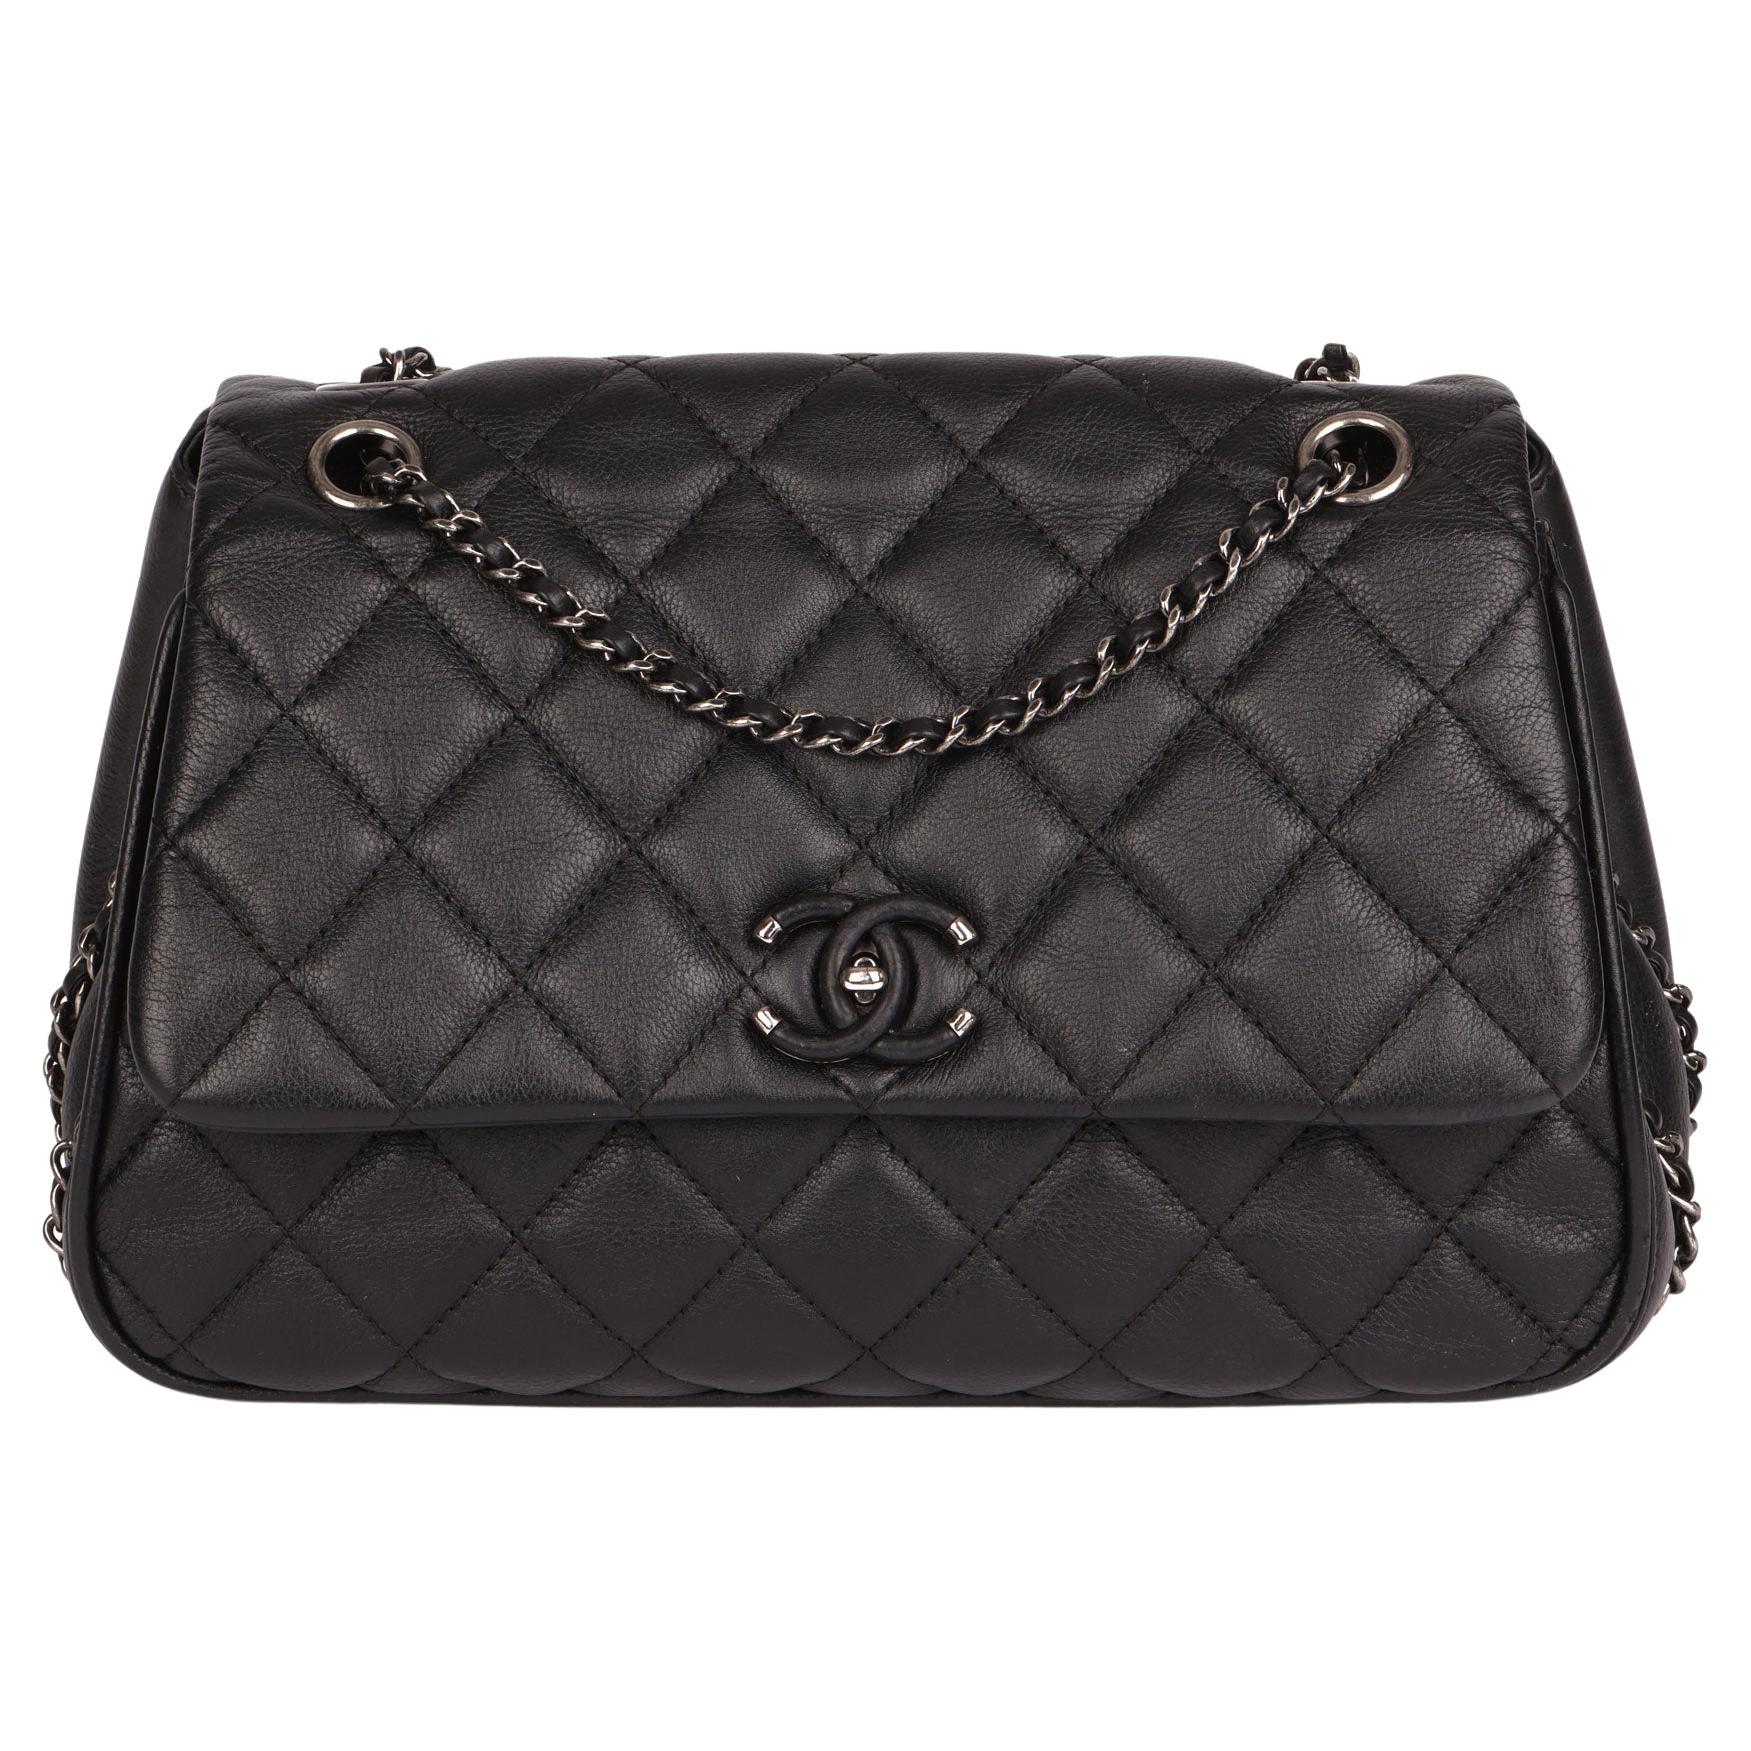 2017 Chanel  Black Quilted Calfskin Leather Medium Frame in Chain Flap Bag